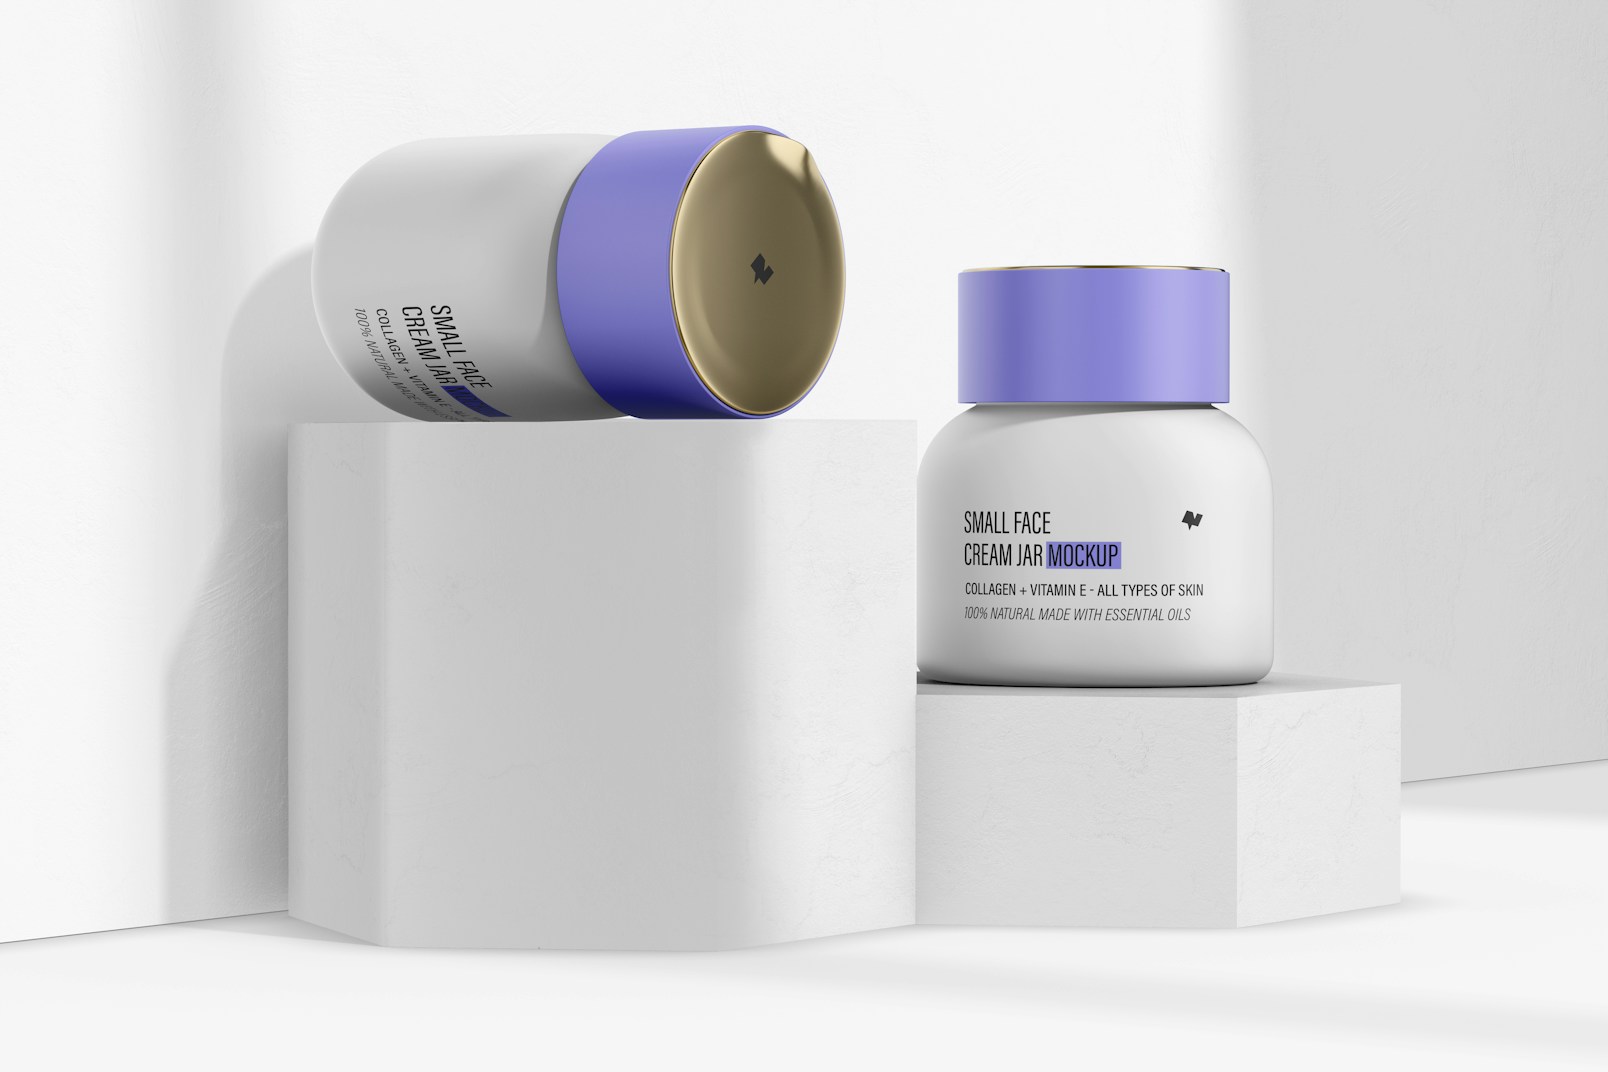 Small Face Cream Jars Mockup, Standing and Dropped